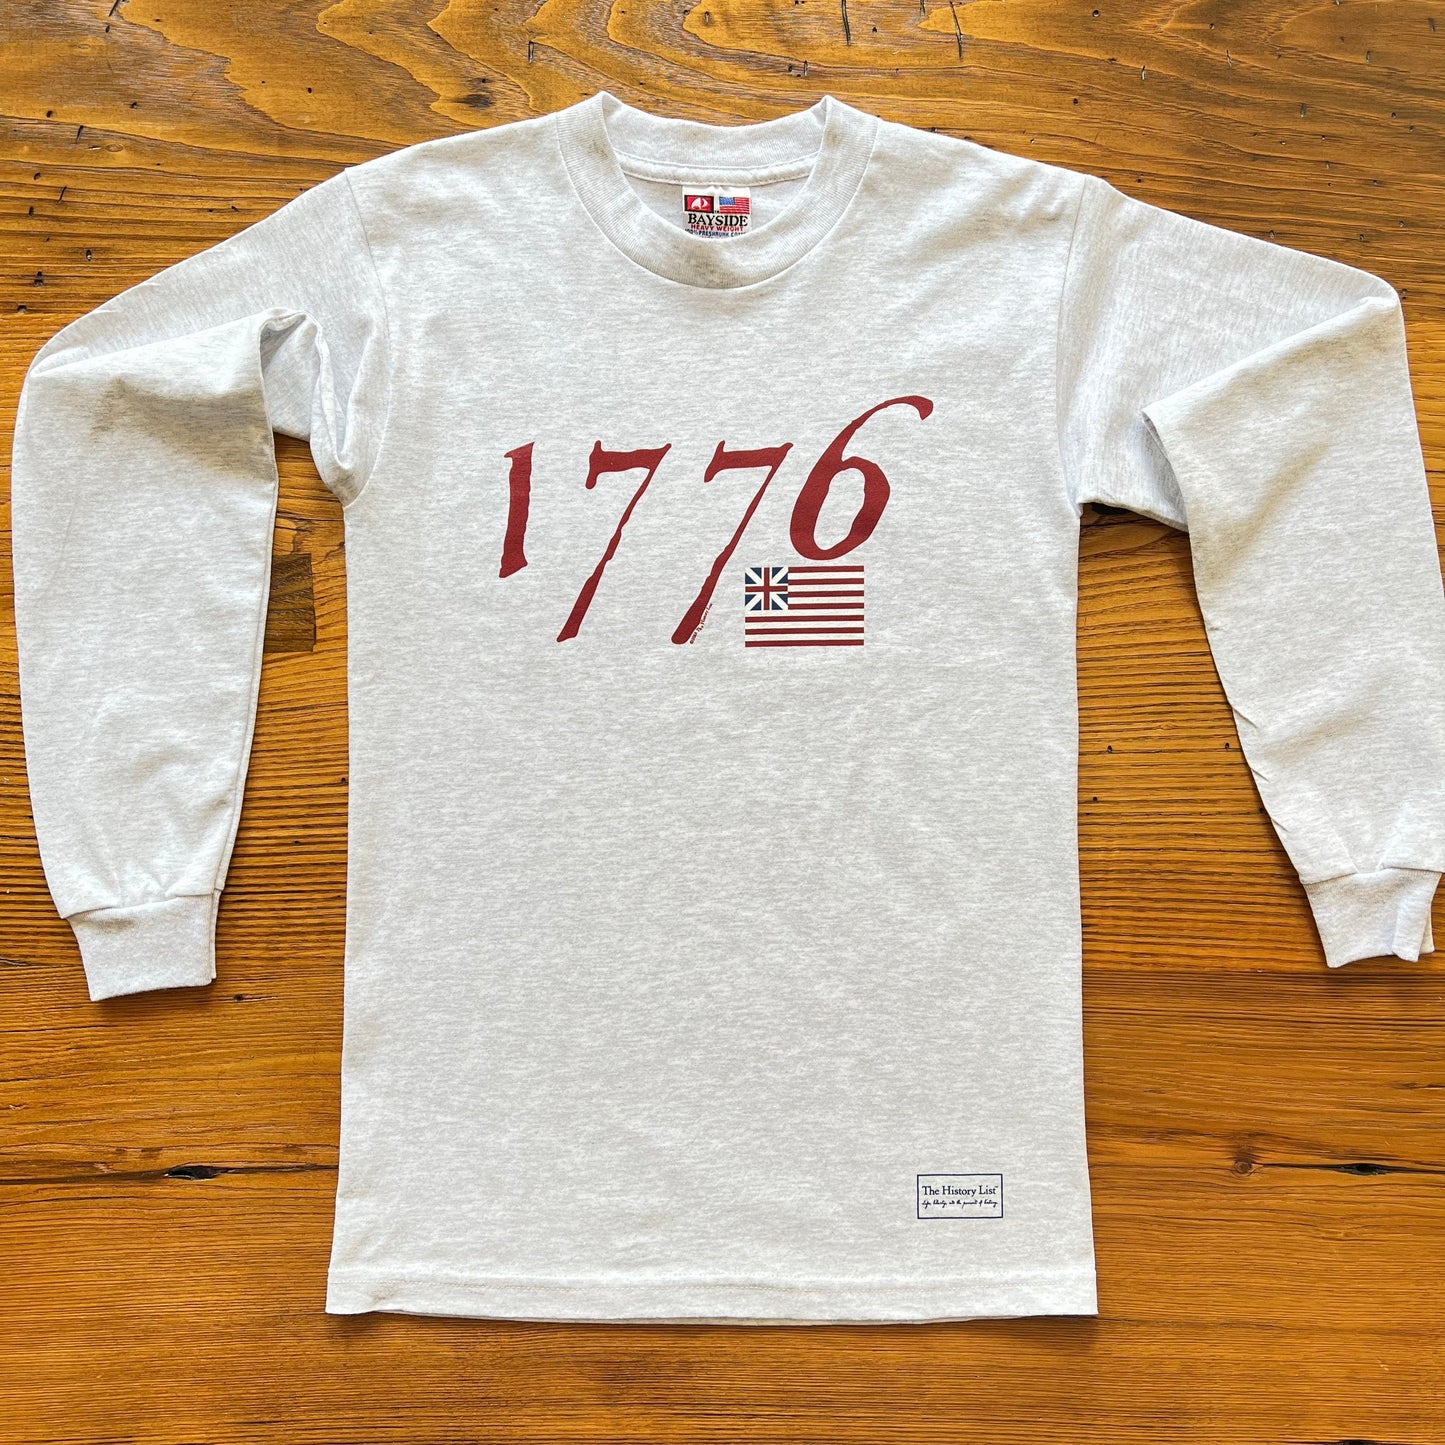 Light Grey "We hold these truths - July 4, 1776” Long-sleeved shirt from the history list store